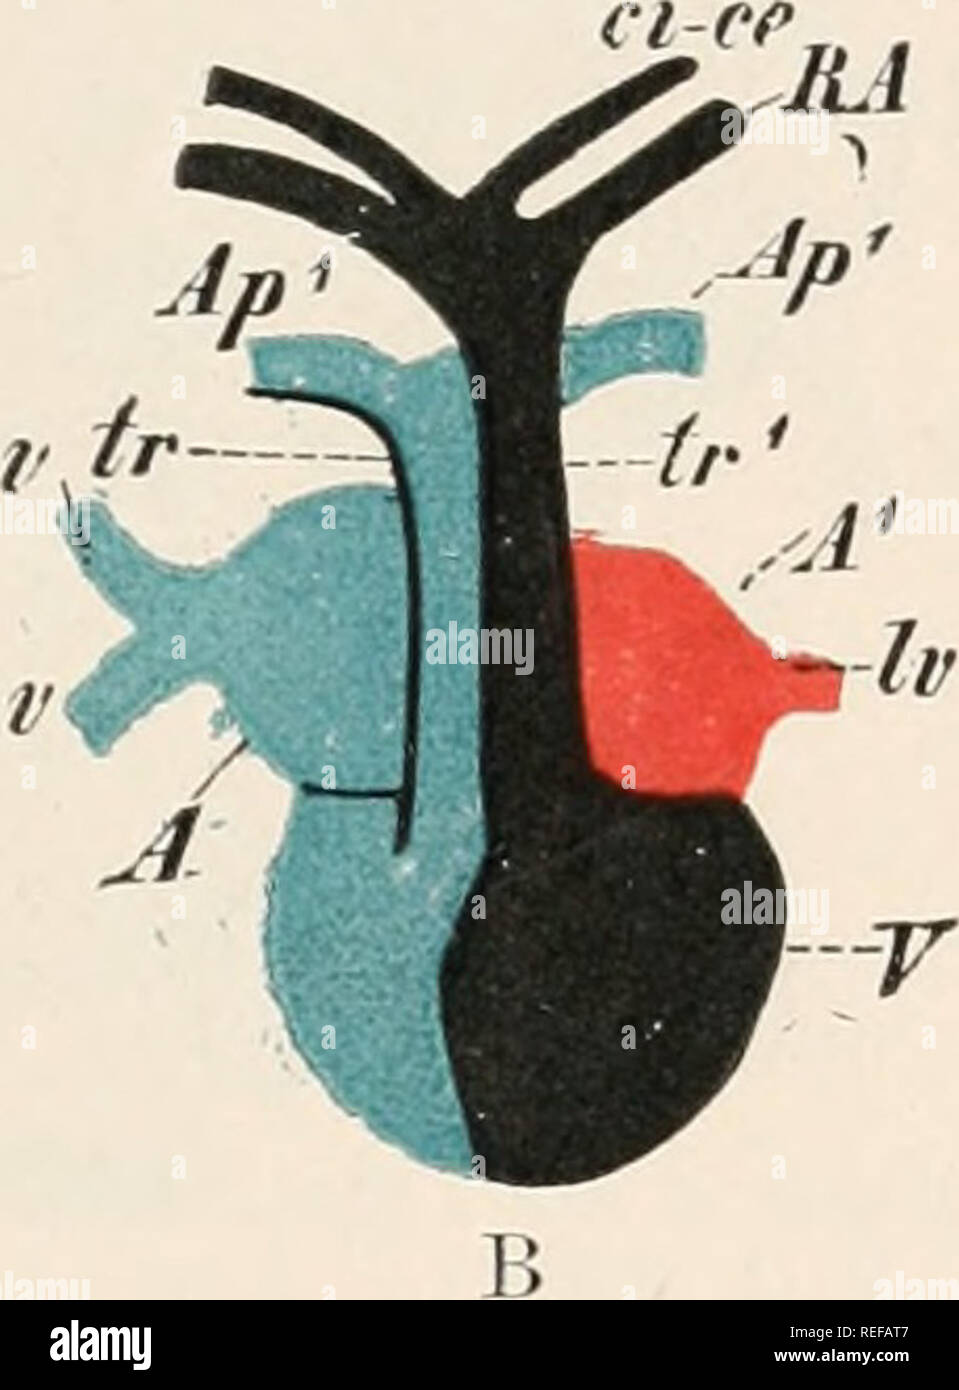 . Comparative anatomy of vertebrates. Anatomy, Comparative; Vertebrates. A FIG. 306.—DIAGRAM SHOWING THE COURSE OF THE BLOOD THROUGH THE HEART ix UrodfJa (A) AND Anura (B). A, right atrium ; A1, left atrium ; ir, fi; pulmonary veins; tr, conus arteriosus, divided in Anura (B) into two portions, tr, tr1 : through tr -venous blood passes into the pulmonary arteries, Aj&gt;}, Aj&gt;1, while through tr1 mixed blood goes to the carotids, ci—&lt;'e, and to the roots of the aorta, Ft A ; V, ventricle ; 11, v, pre- and postcavals (only one precaval is indicated). are always two sinu-atrial valves and  Stock Photo